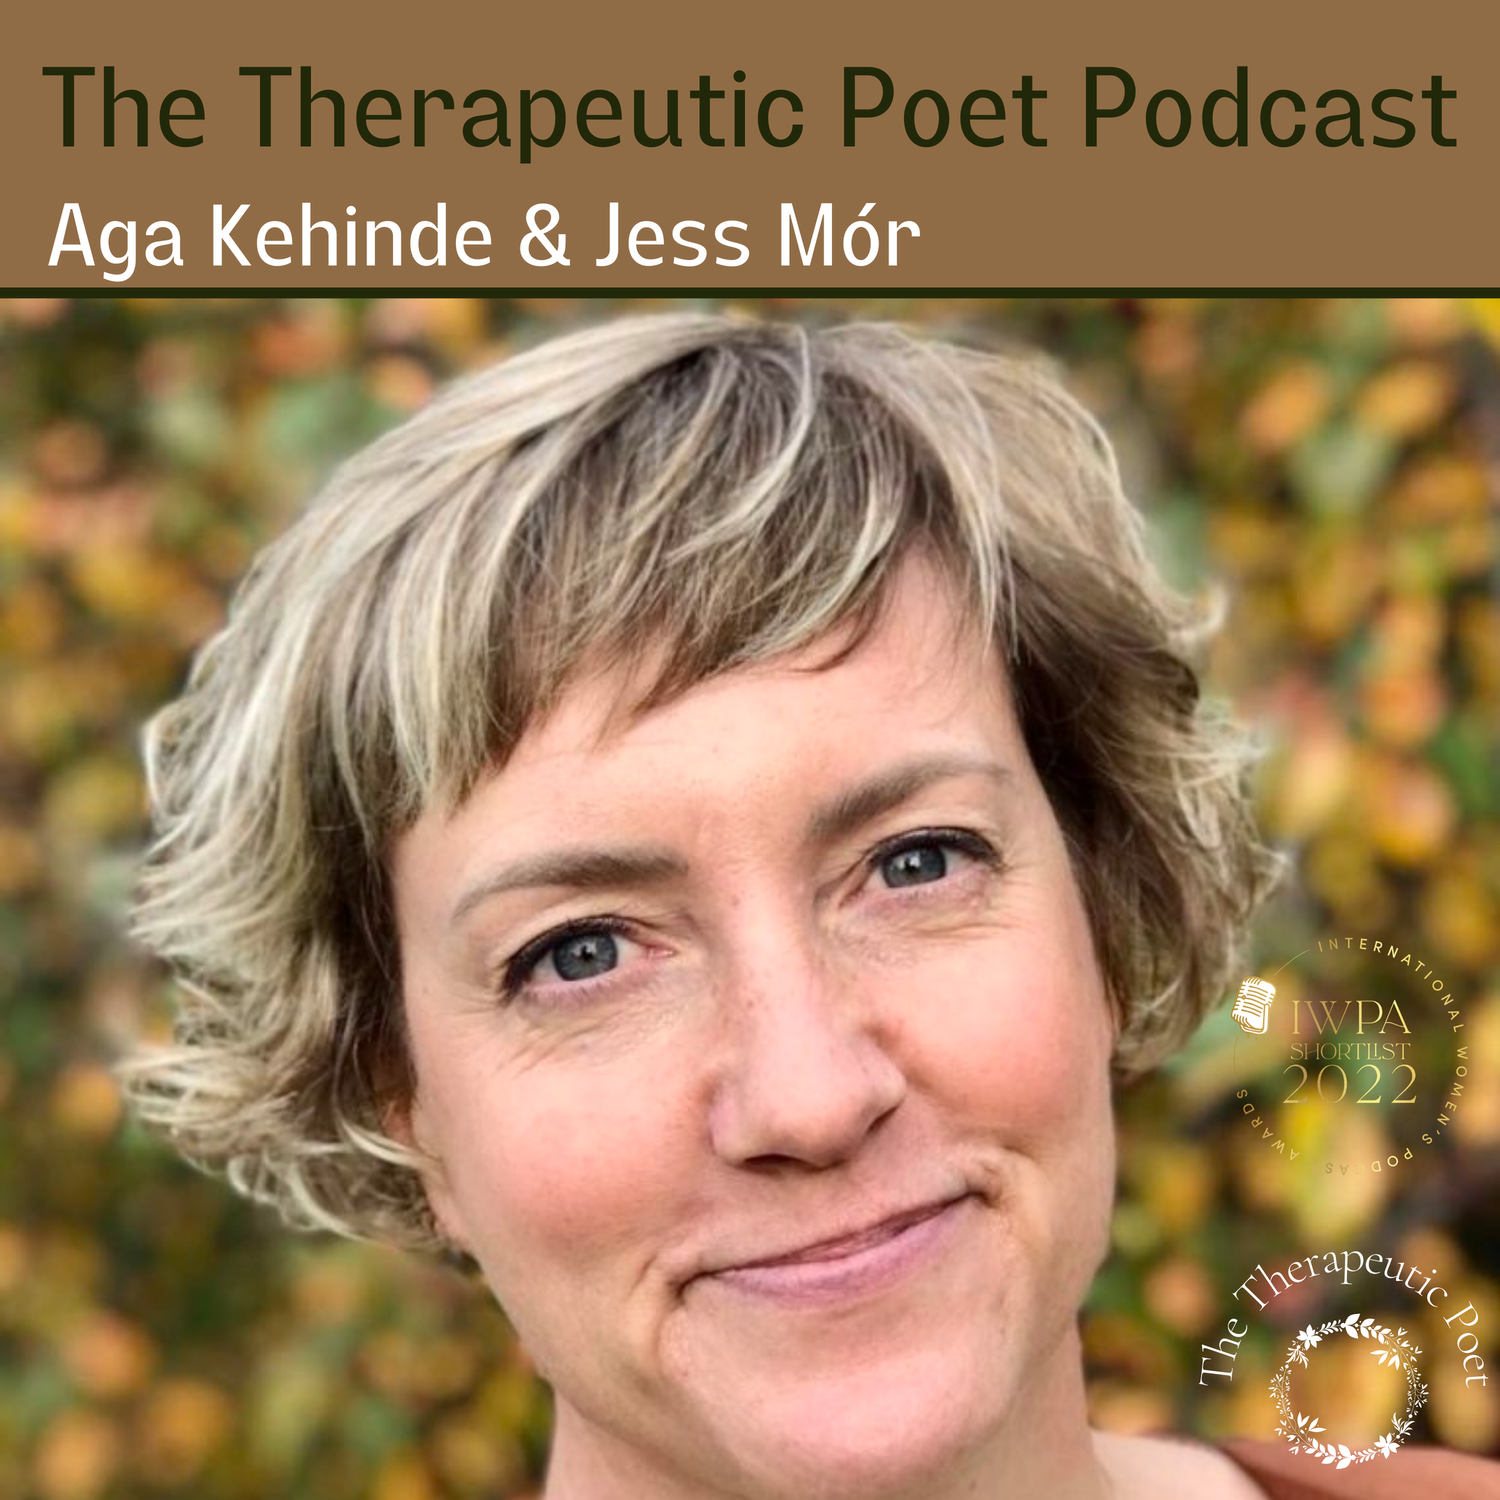 In conversation with Aga Kehinde and Jess Mór